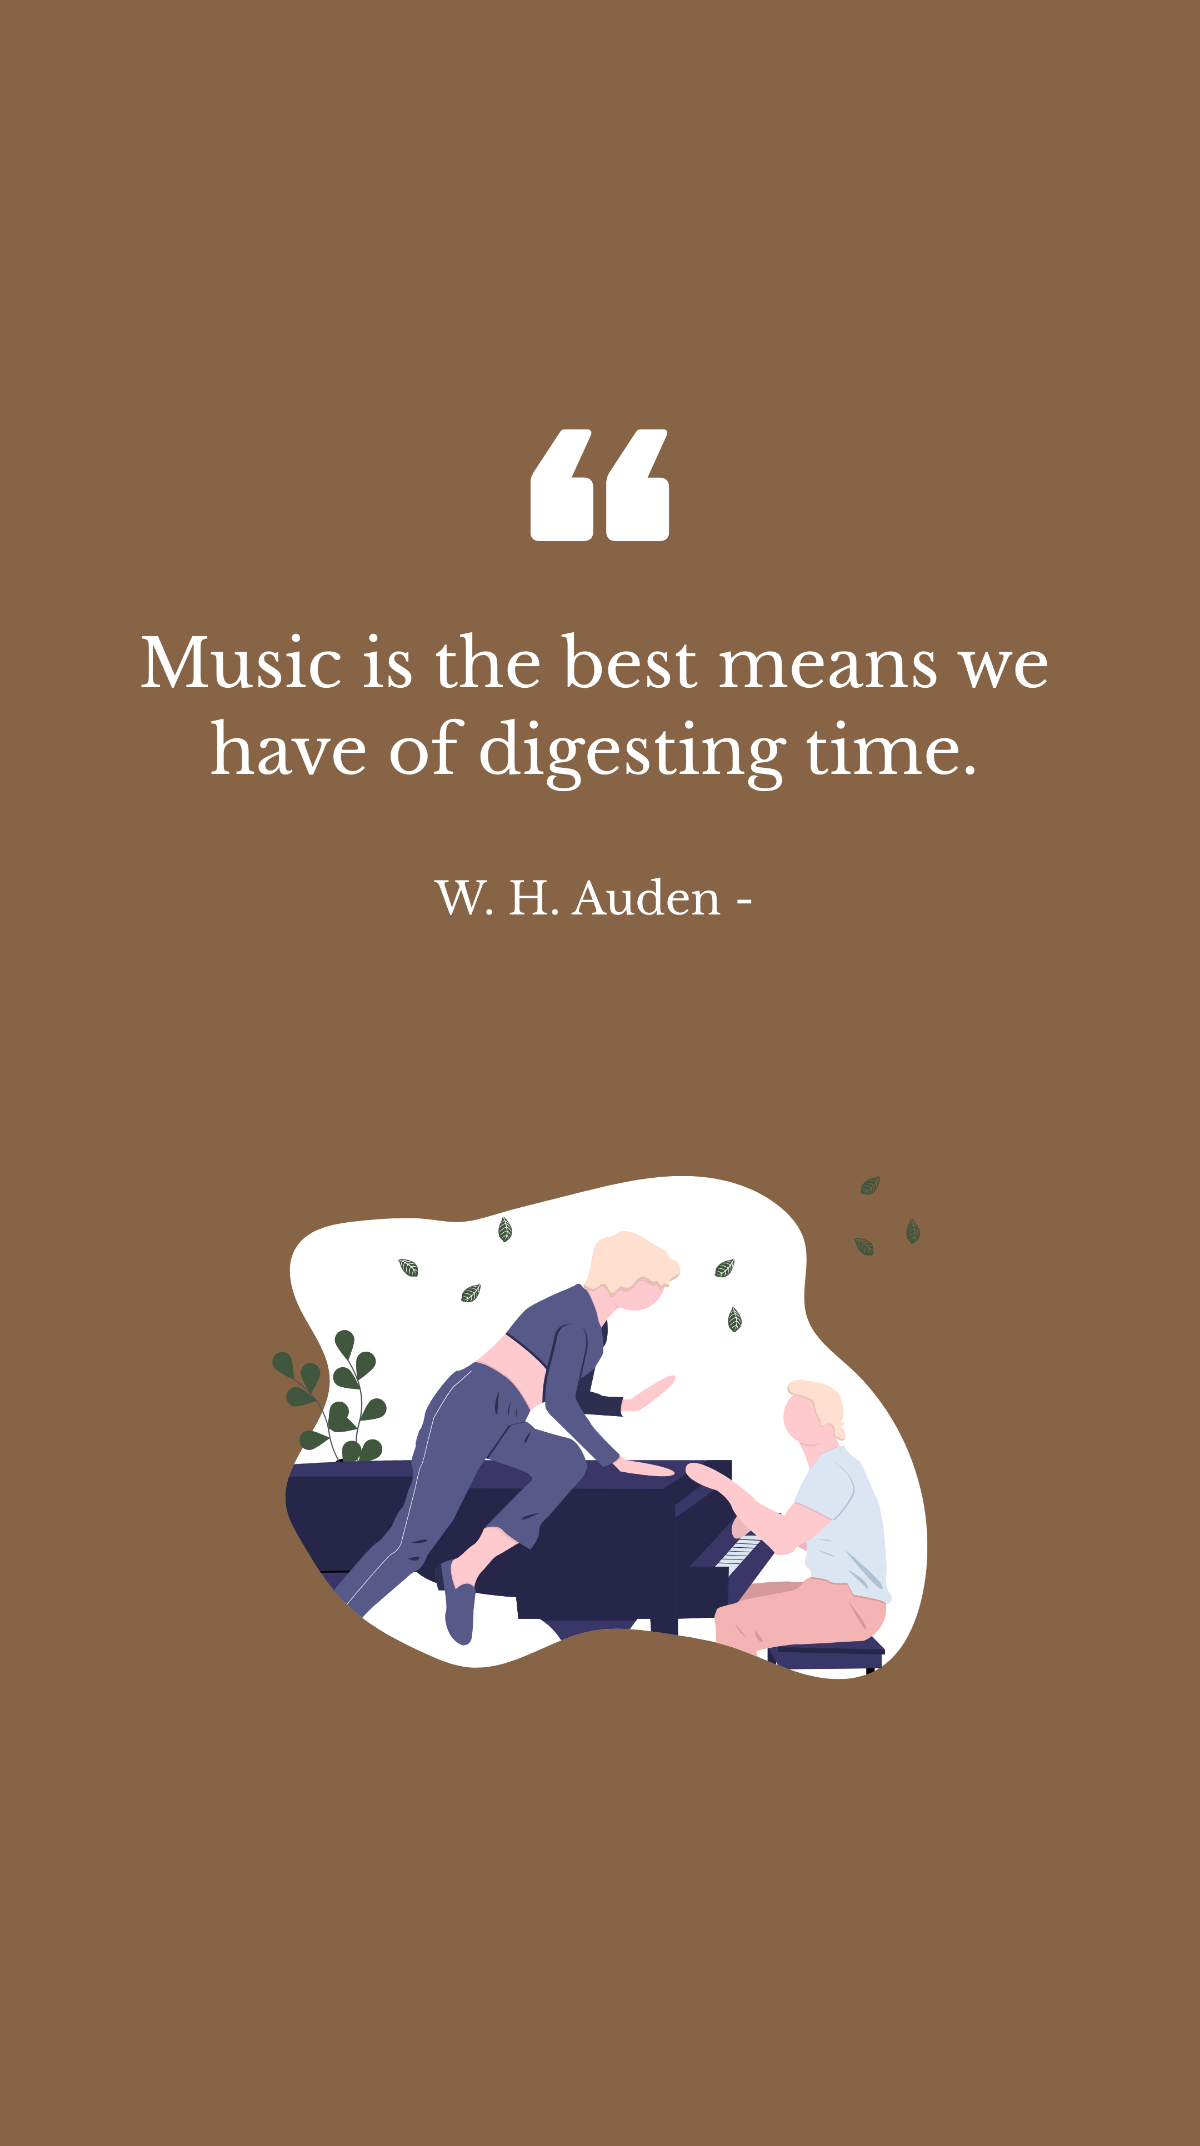 W. H. Auden - Music is the best means we have of digesting time.